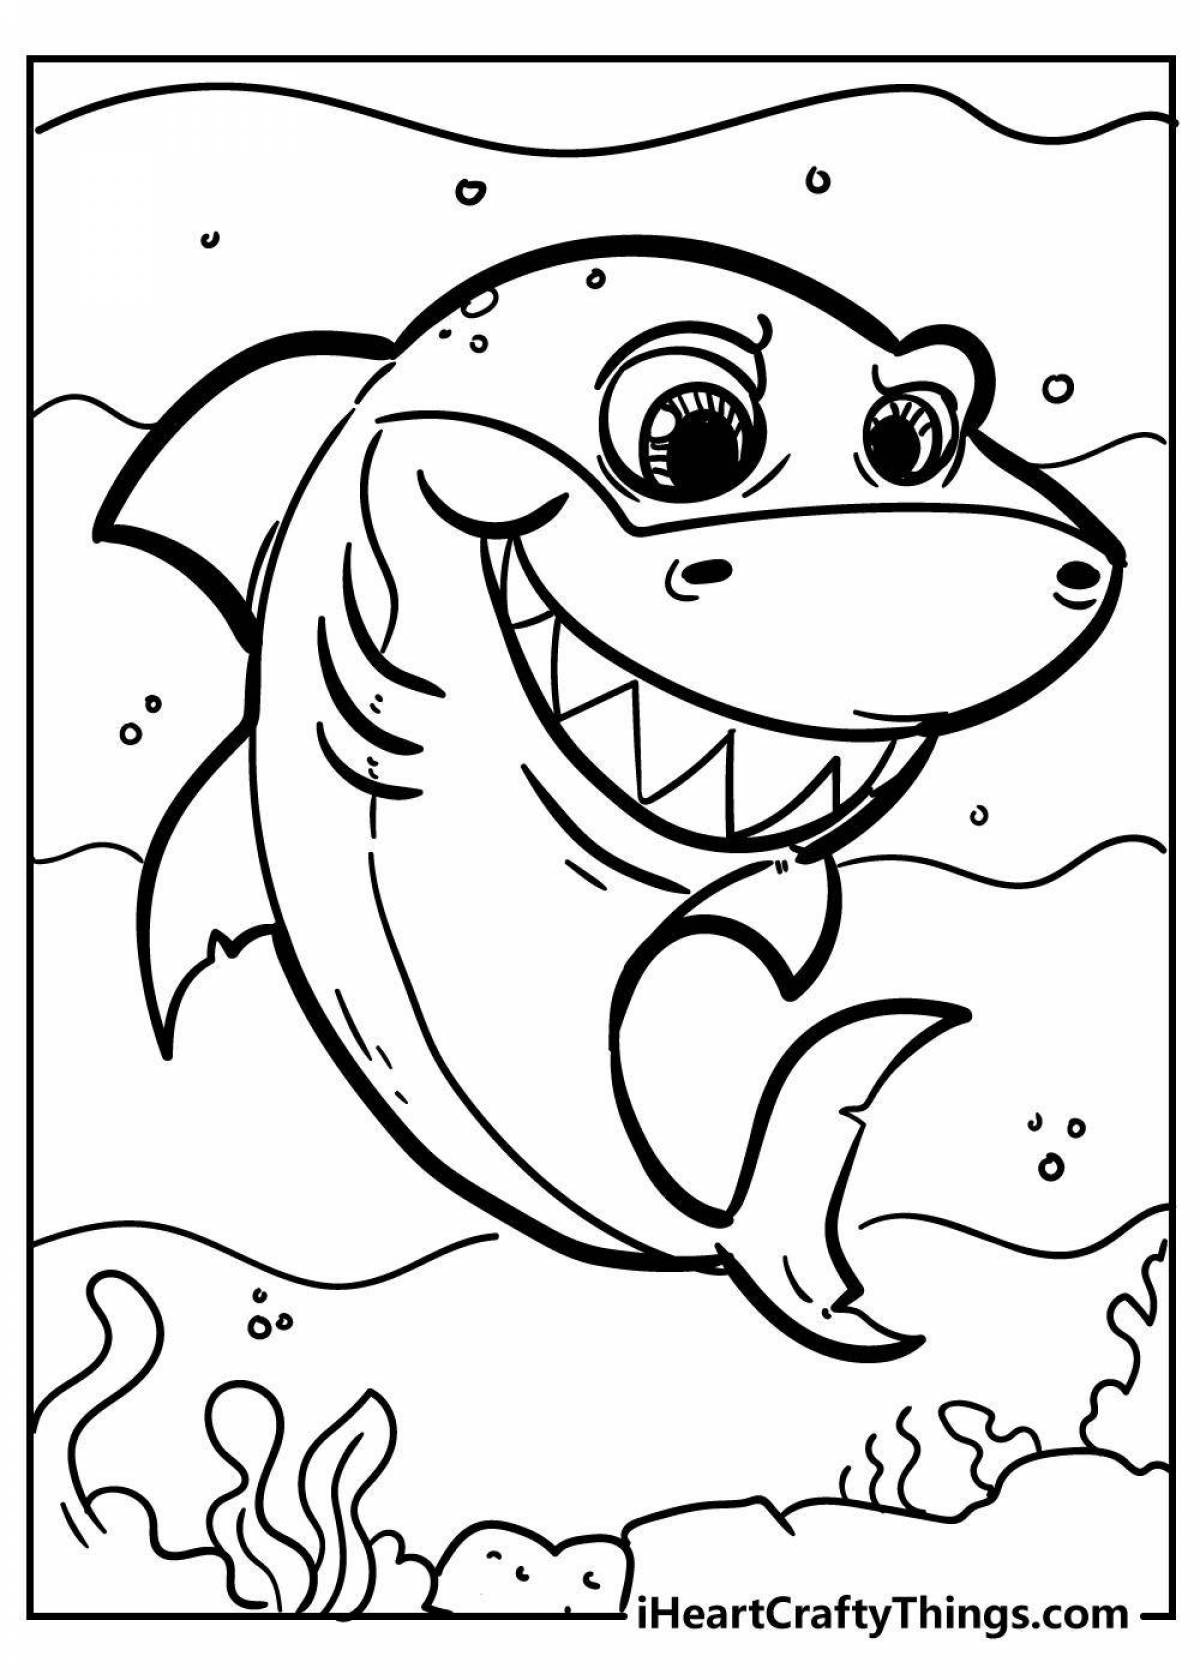 Playful shark coloring book for 6-7 year olds